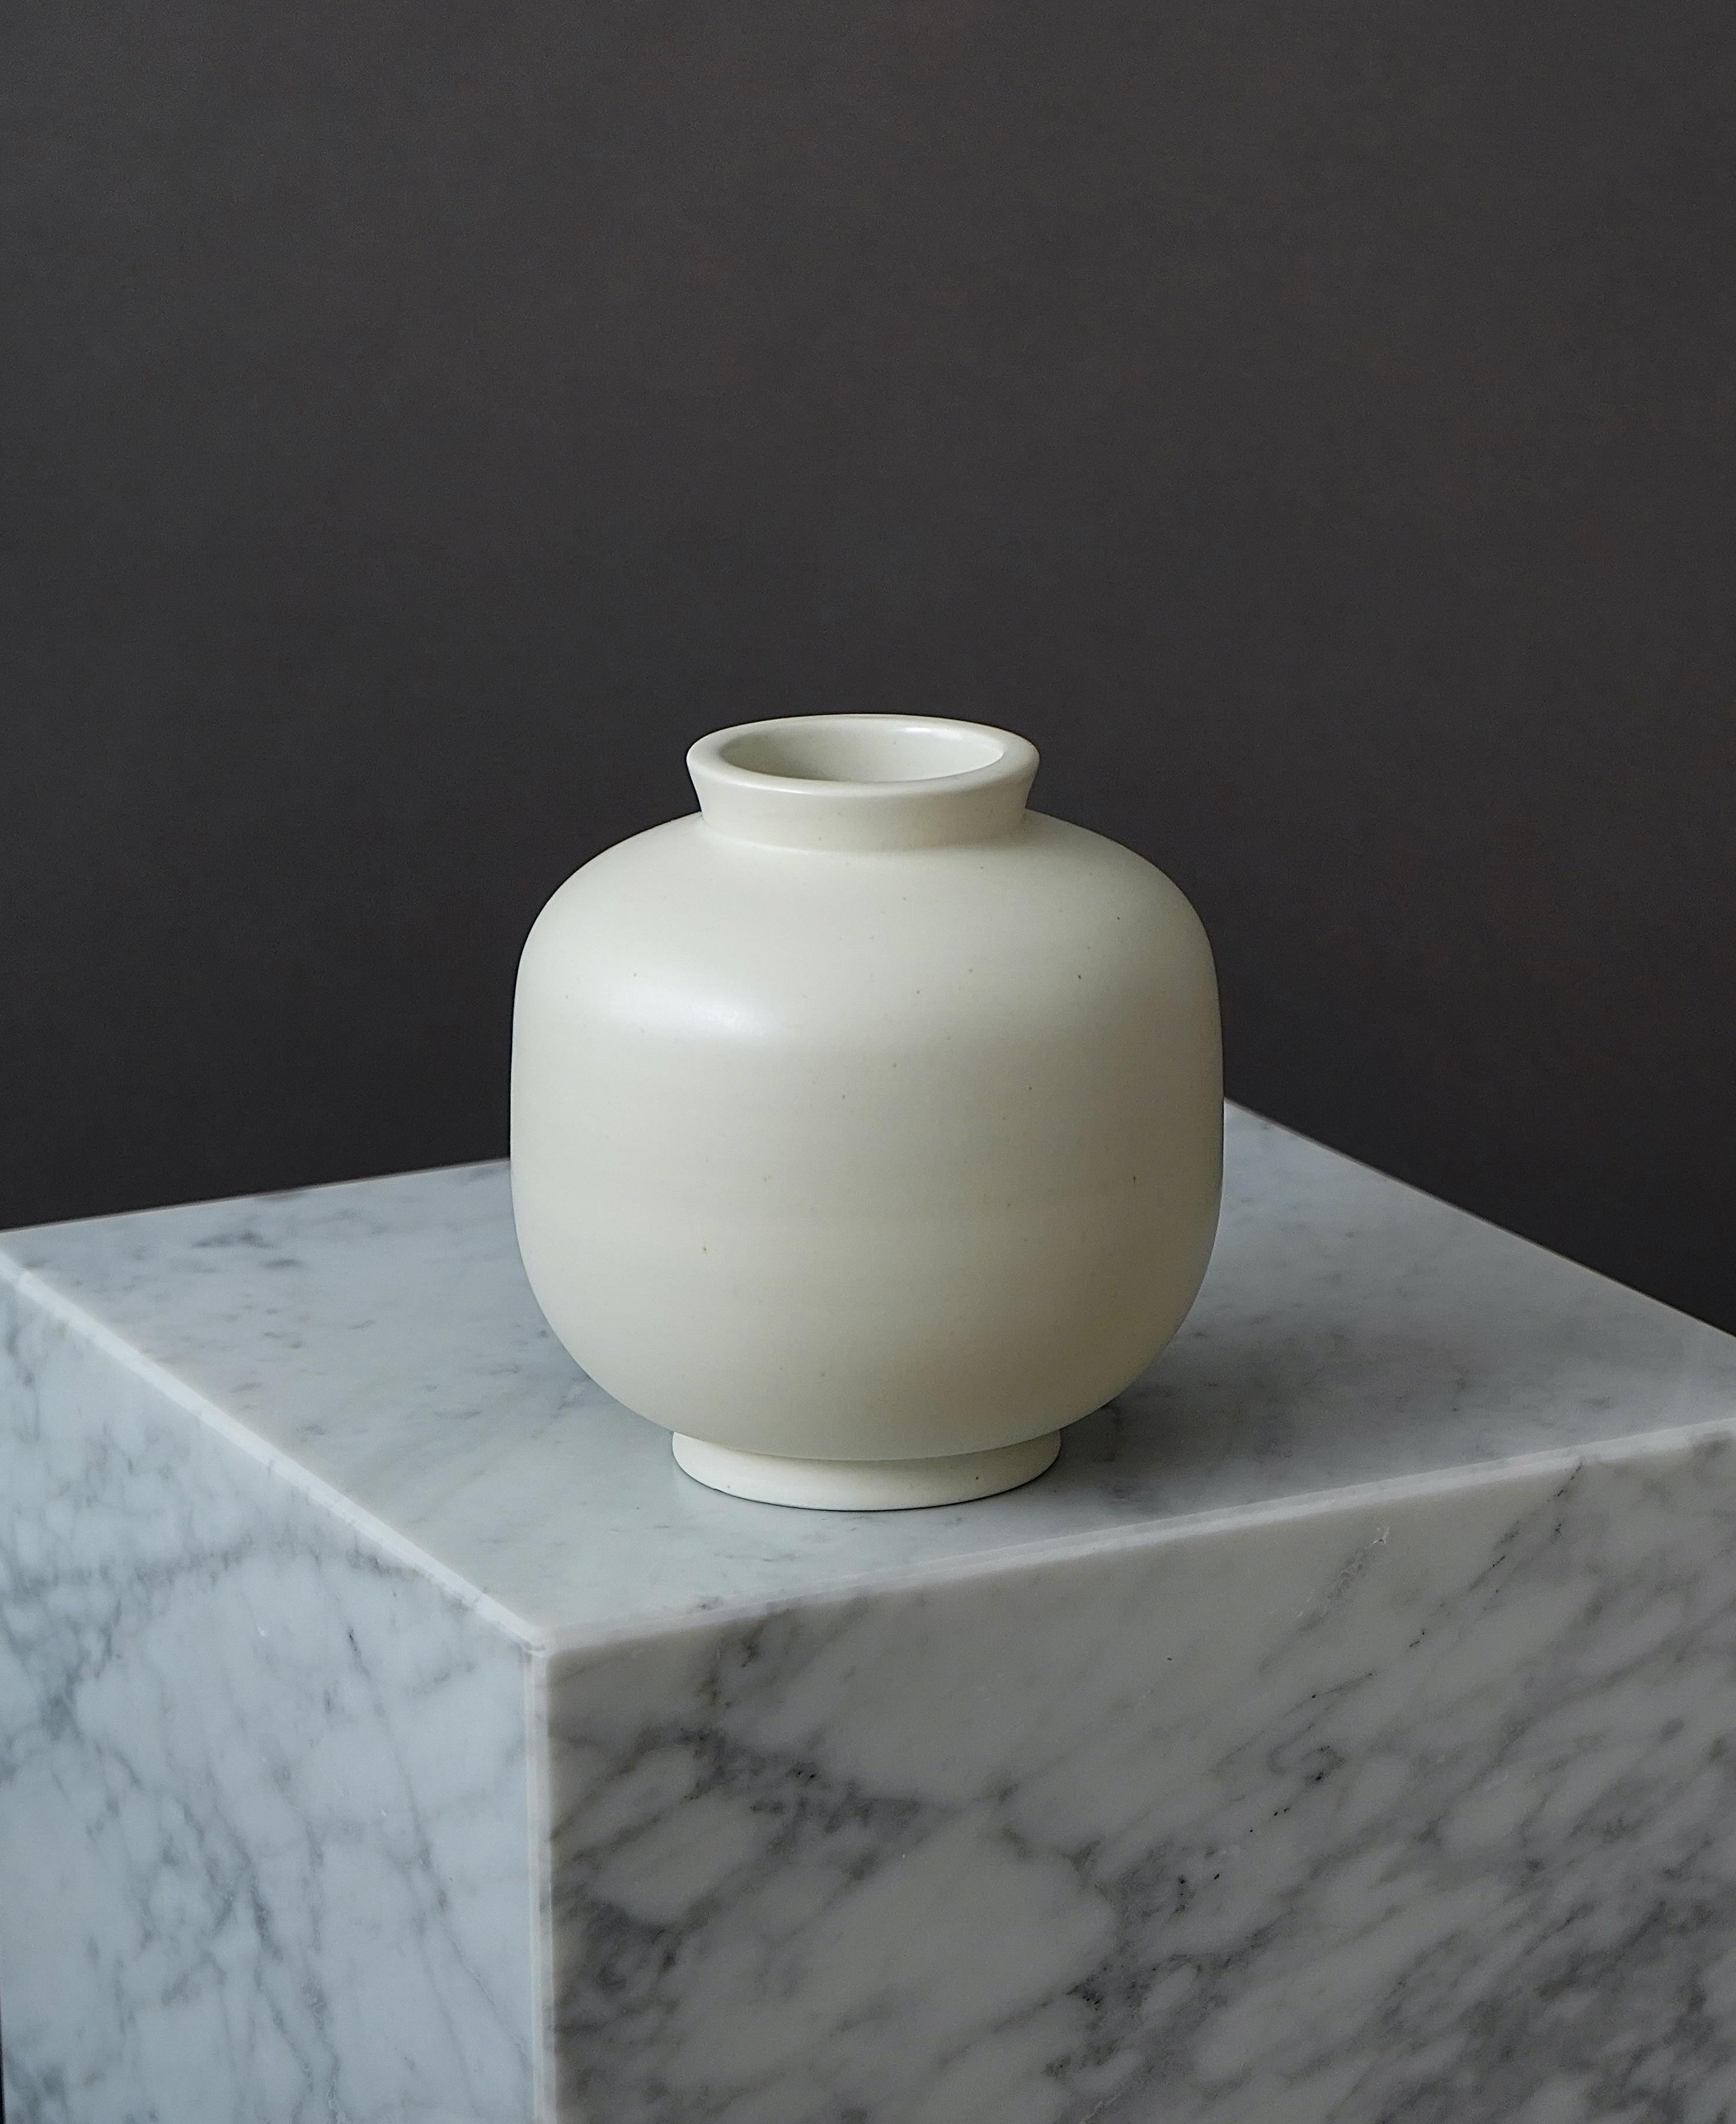 A beautiful 'Swedish Modern' stoneware vase with 'Carrara' glaze.
Made by Wilhelm Kåge at Gustavsberg in Sweden, 1930s. 

Great condition. 
Stamped 'Gustavsberg / CARRARA' and impressed 'Gustavsberg / HANDDREJAD'.

Wilhelm Kåge was a Swedish artist,